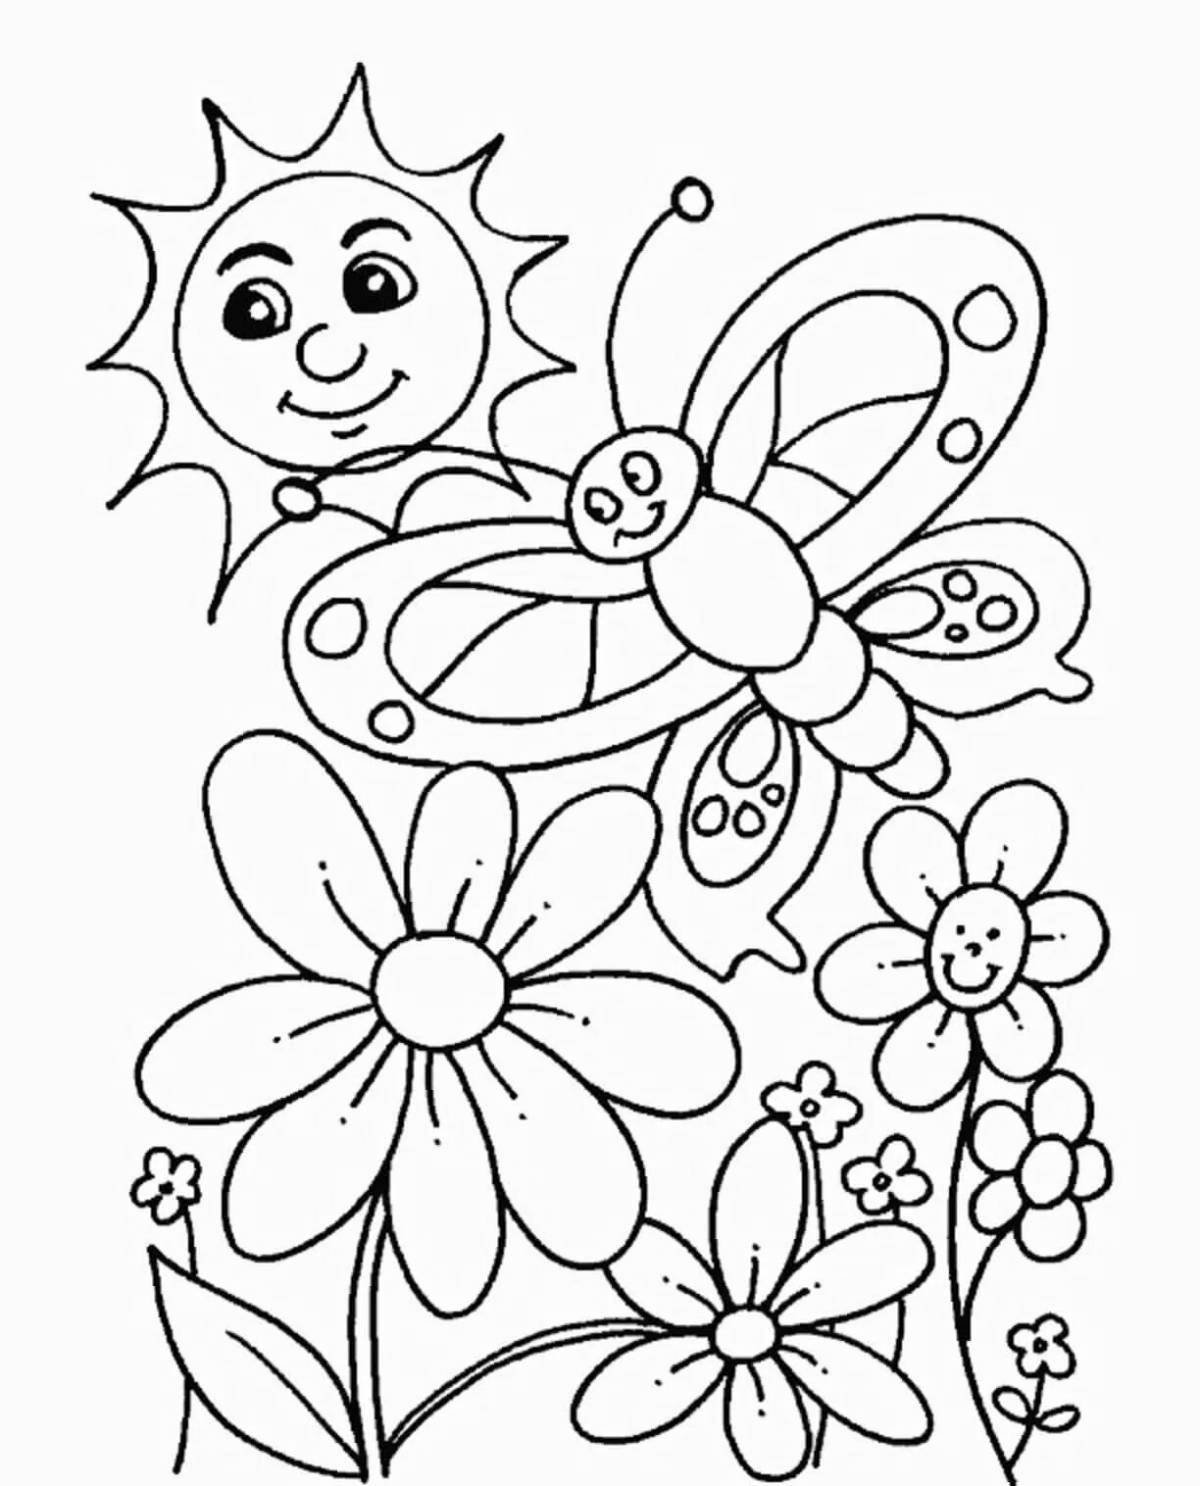 Violent coloring flowers for children 4-5 years old